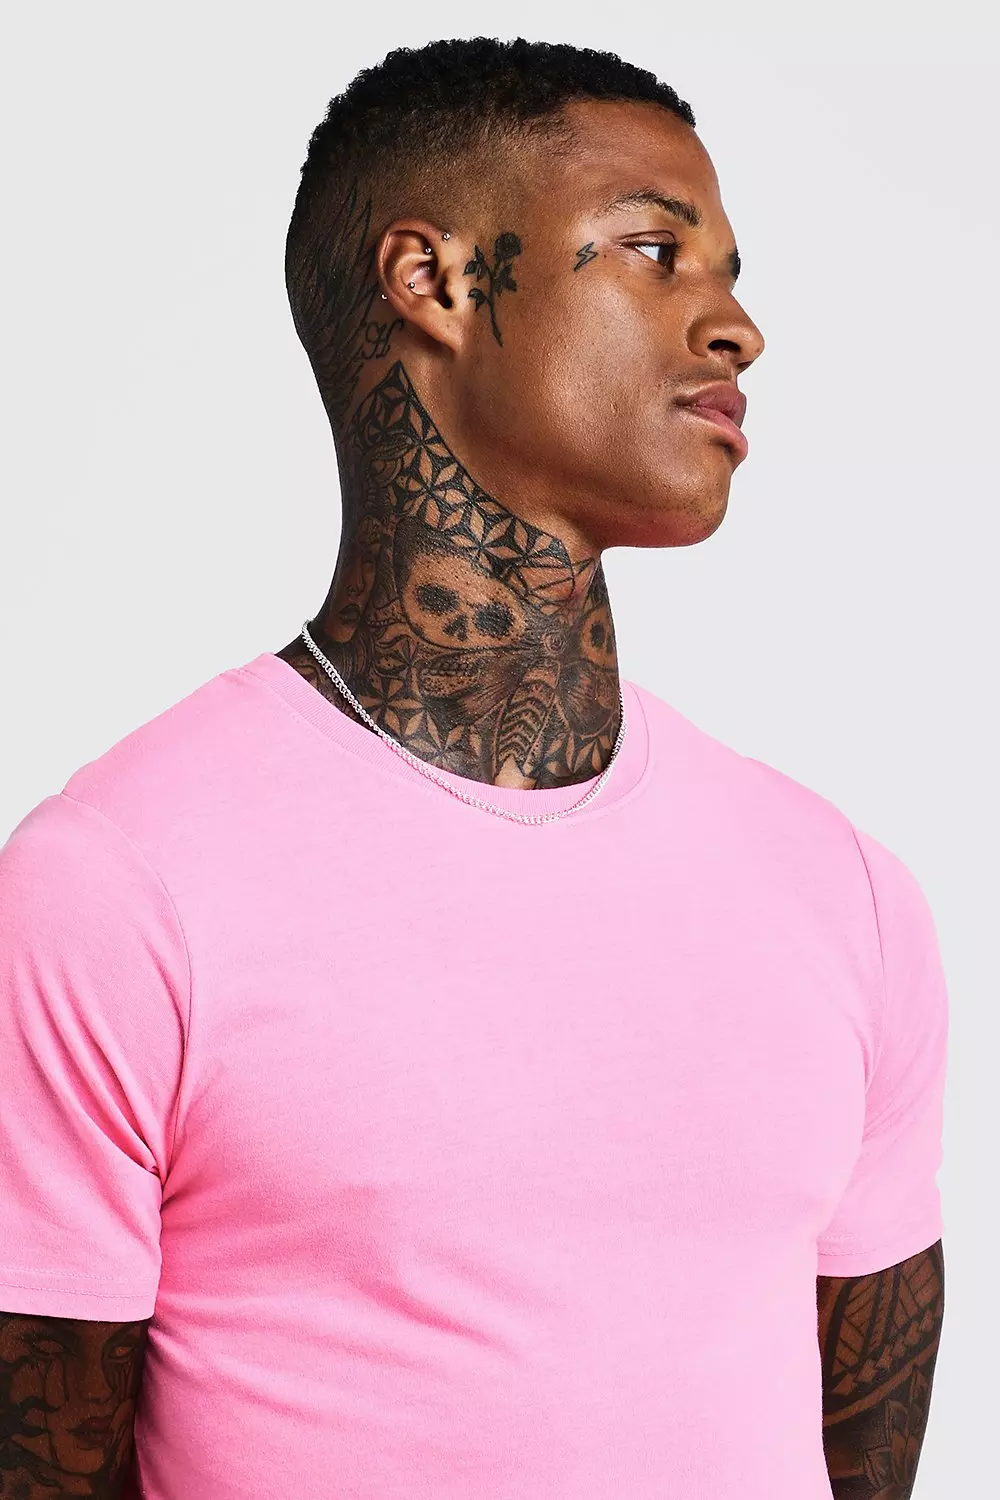 T-Shirt Men Rhinestone Pink Large Size 5XL New 2023 Spring Personalized  Trend High Quality Short Sleeve Round Neck Tees Male Top